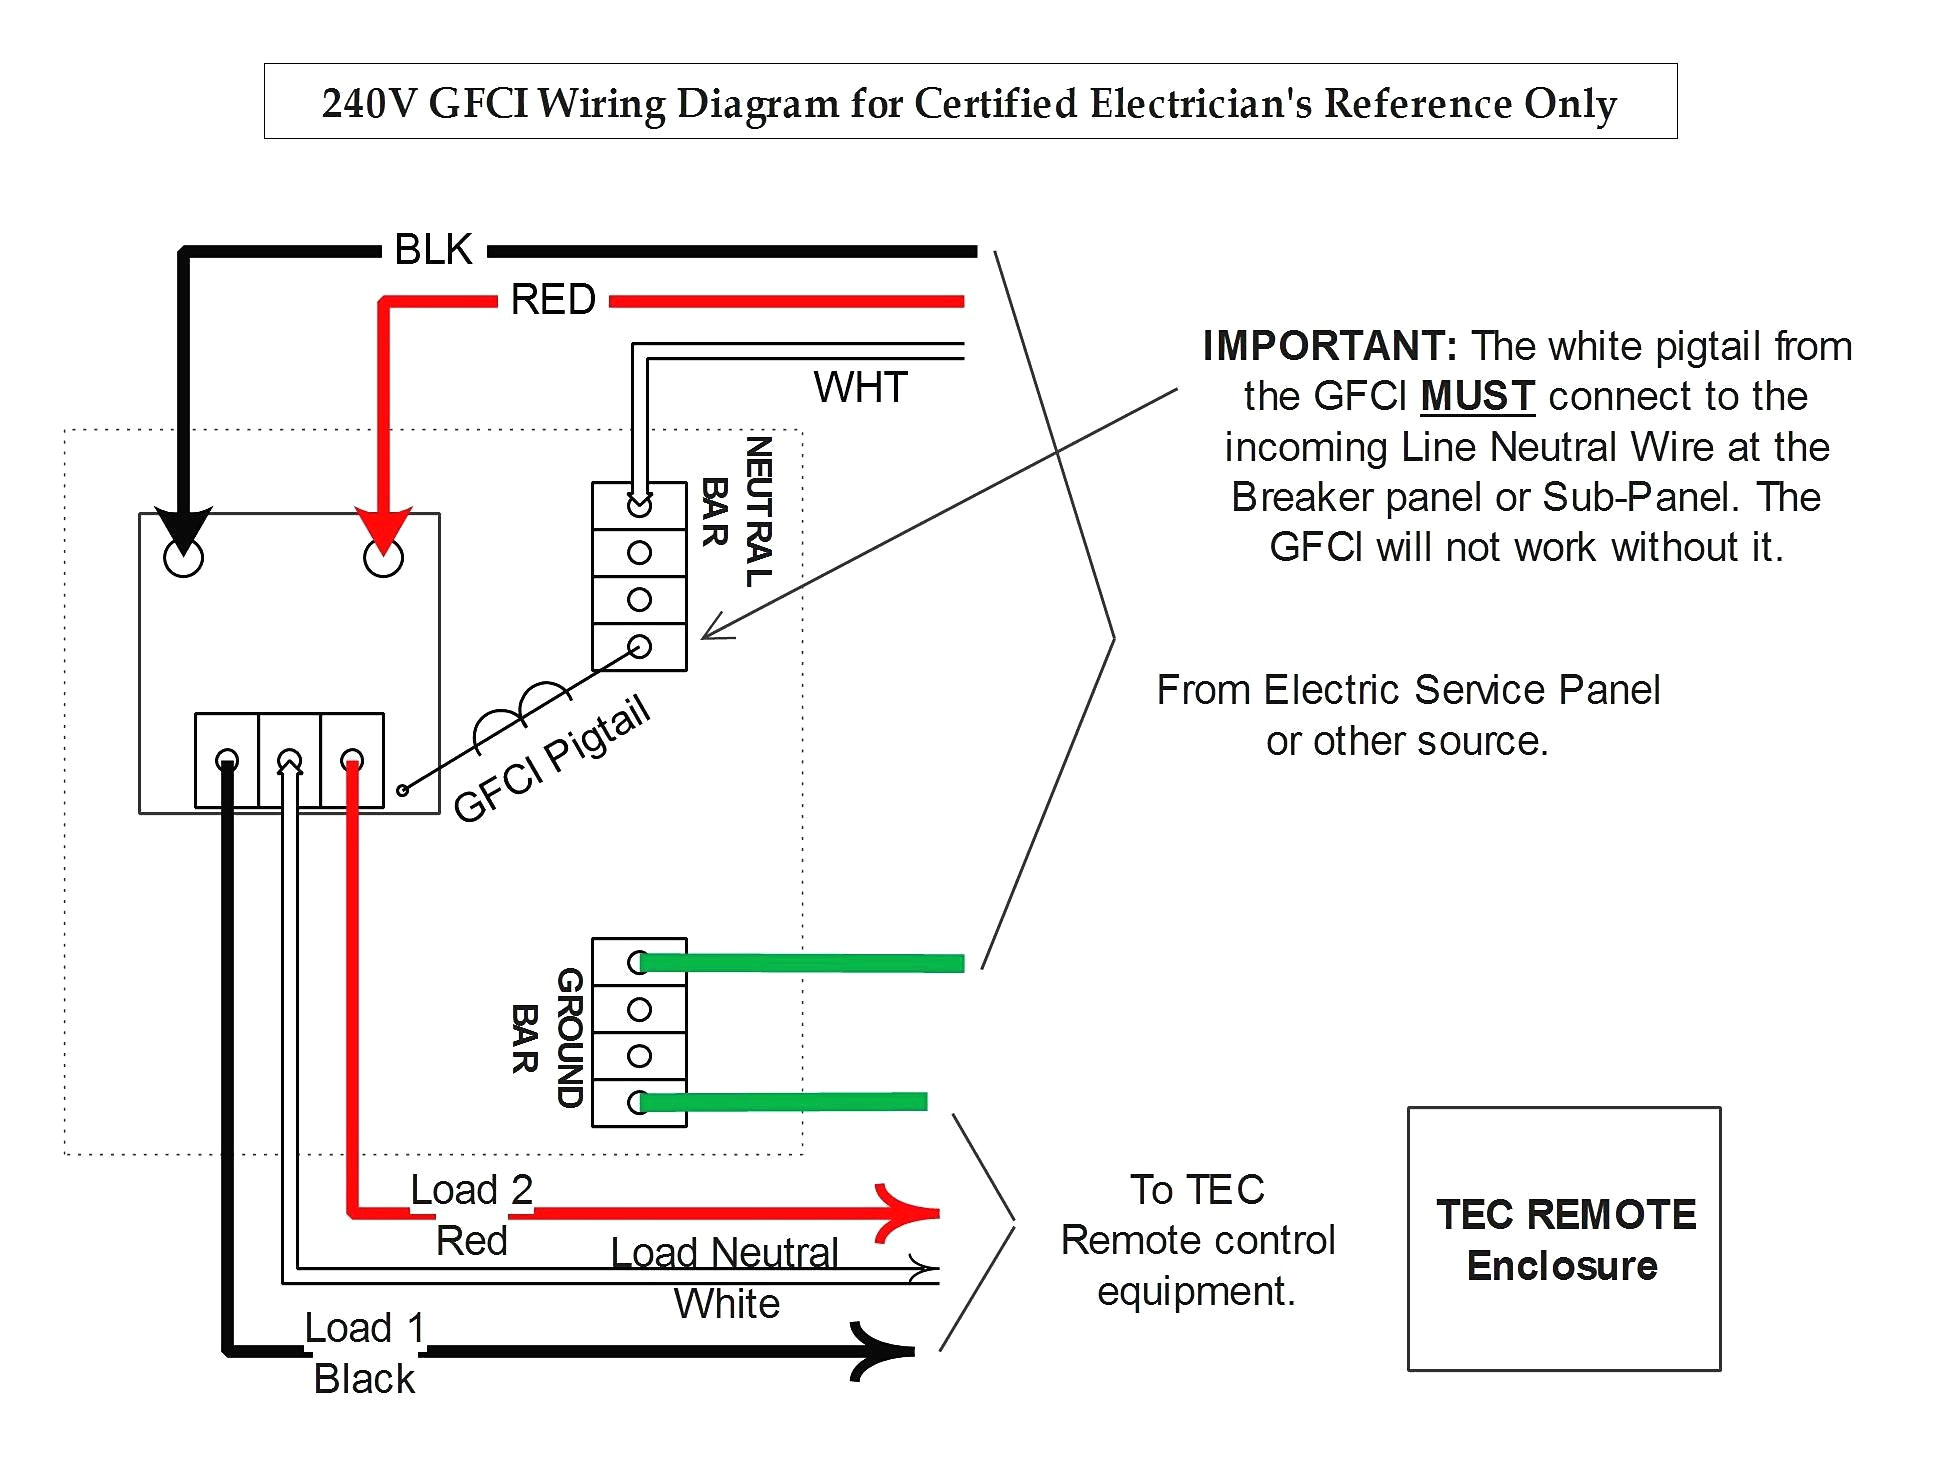 leviton switch wiring diagram inspirational leviton gfci wiring diagram perfect electrical wiring gfci outlet photograph of